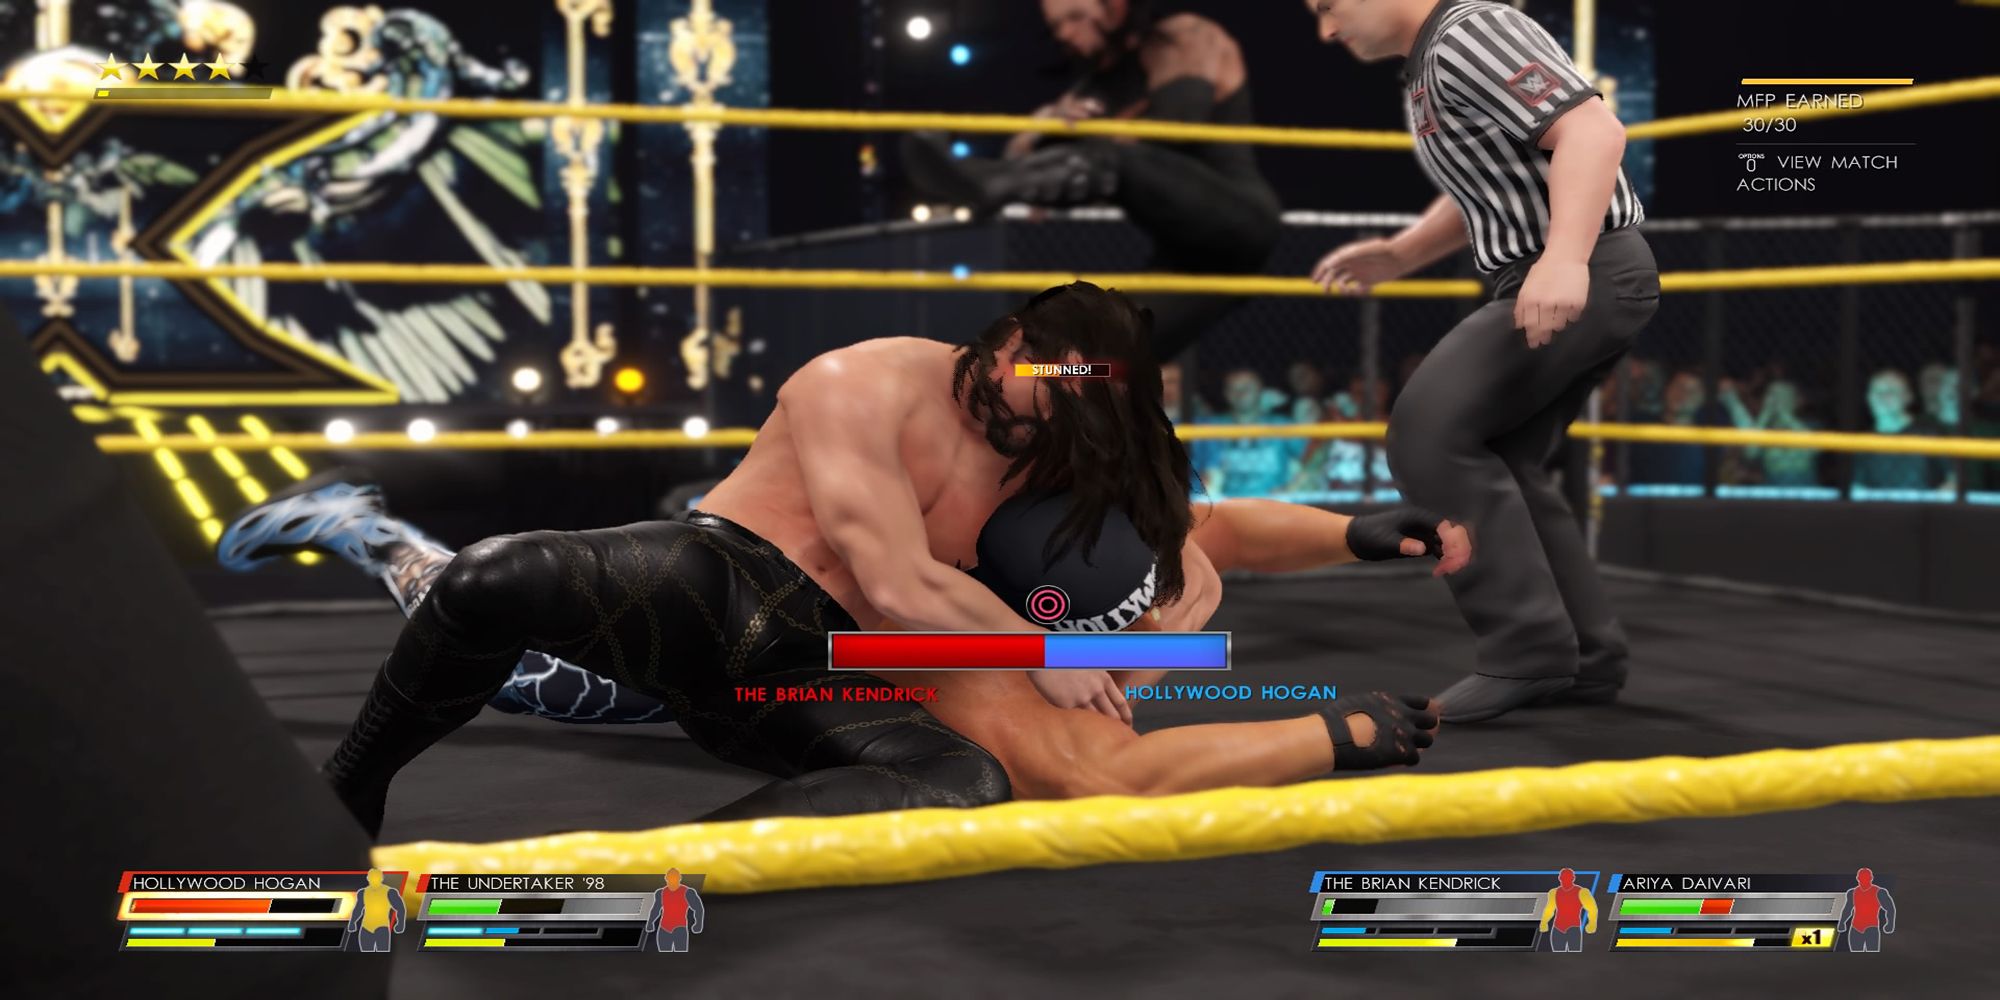 The Brian Kendrick holds Hollywood Hogan in a submission, while the Undertaker intervenes, in a Tag Team Match at the NXT Arena. WWE 2K22. 